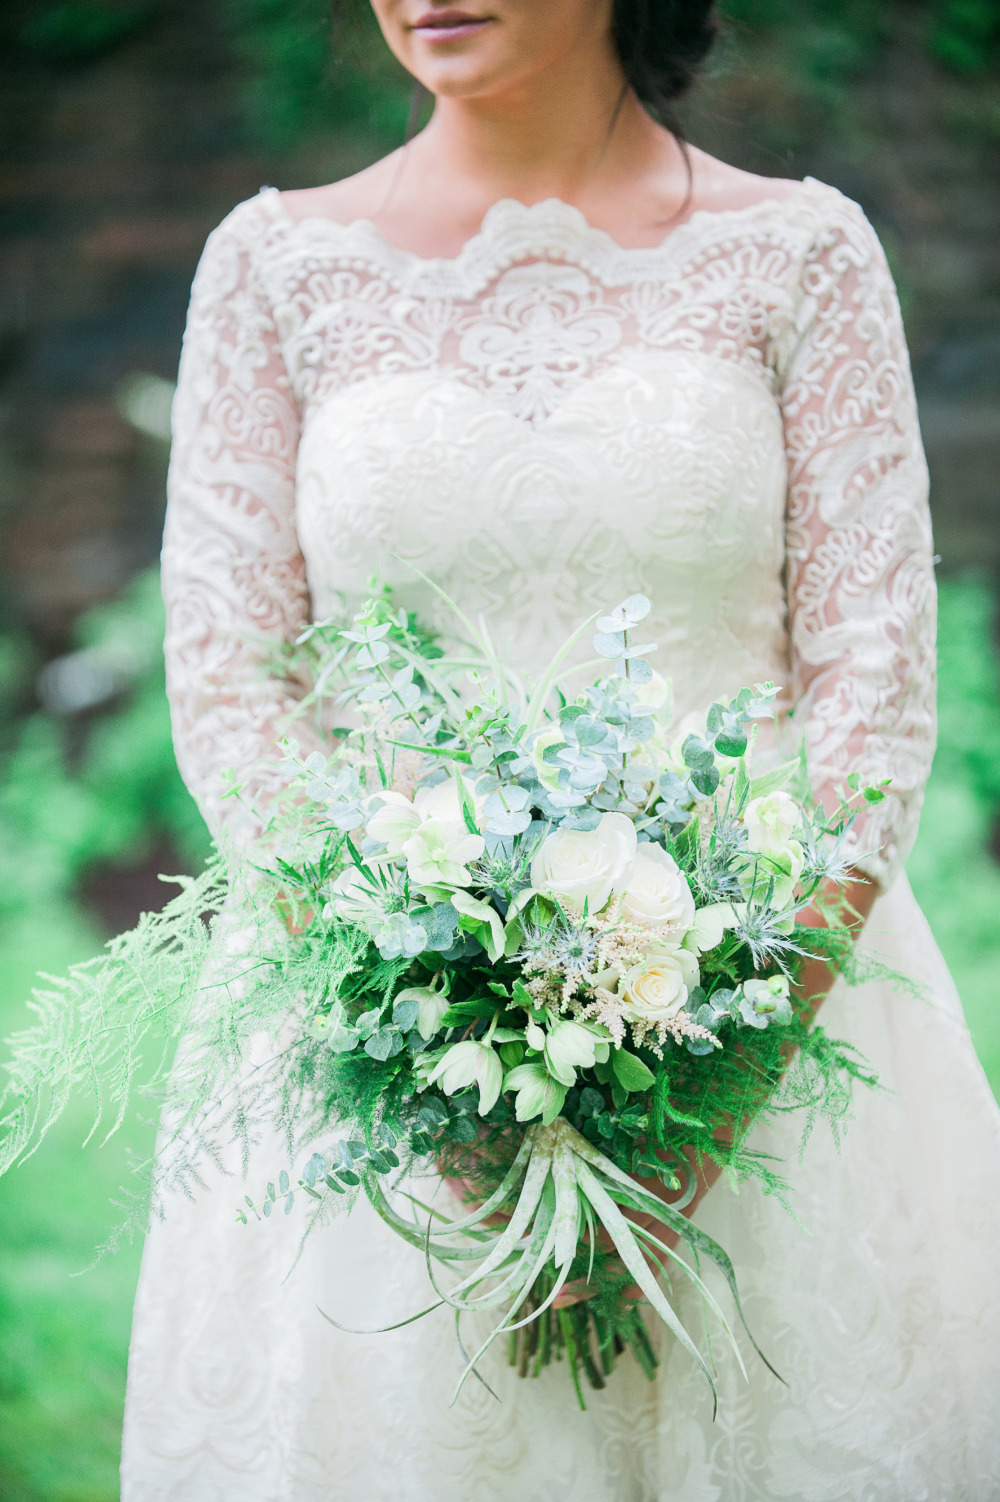 gorgoues lace wedding dress and white bouquet